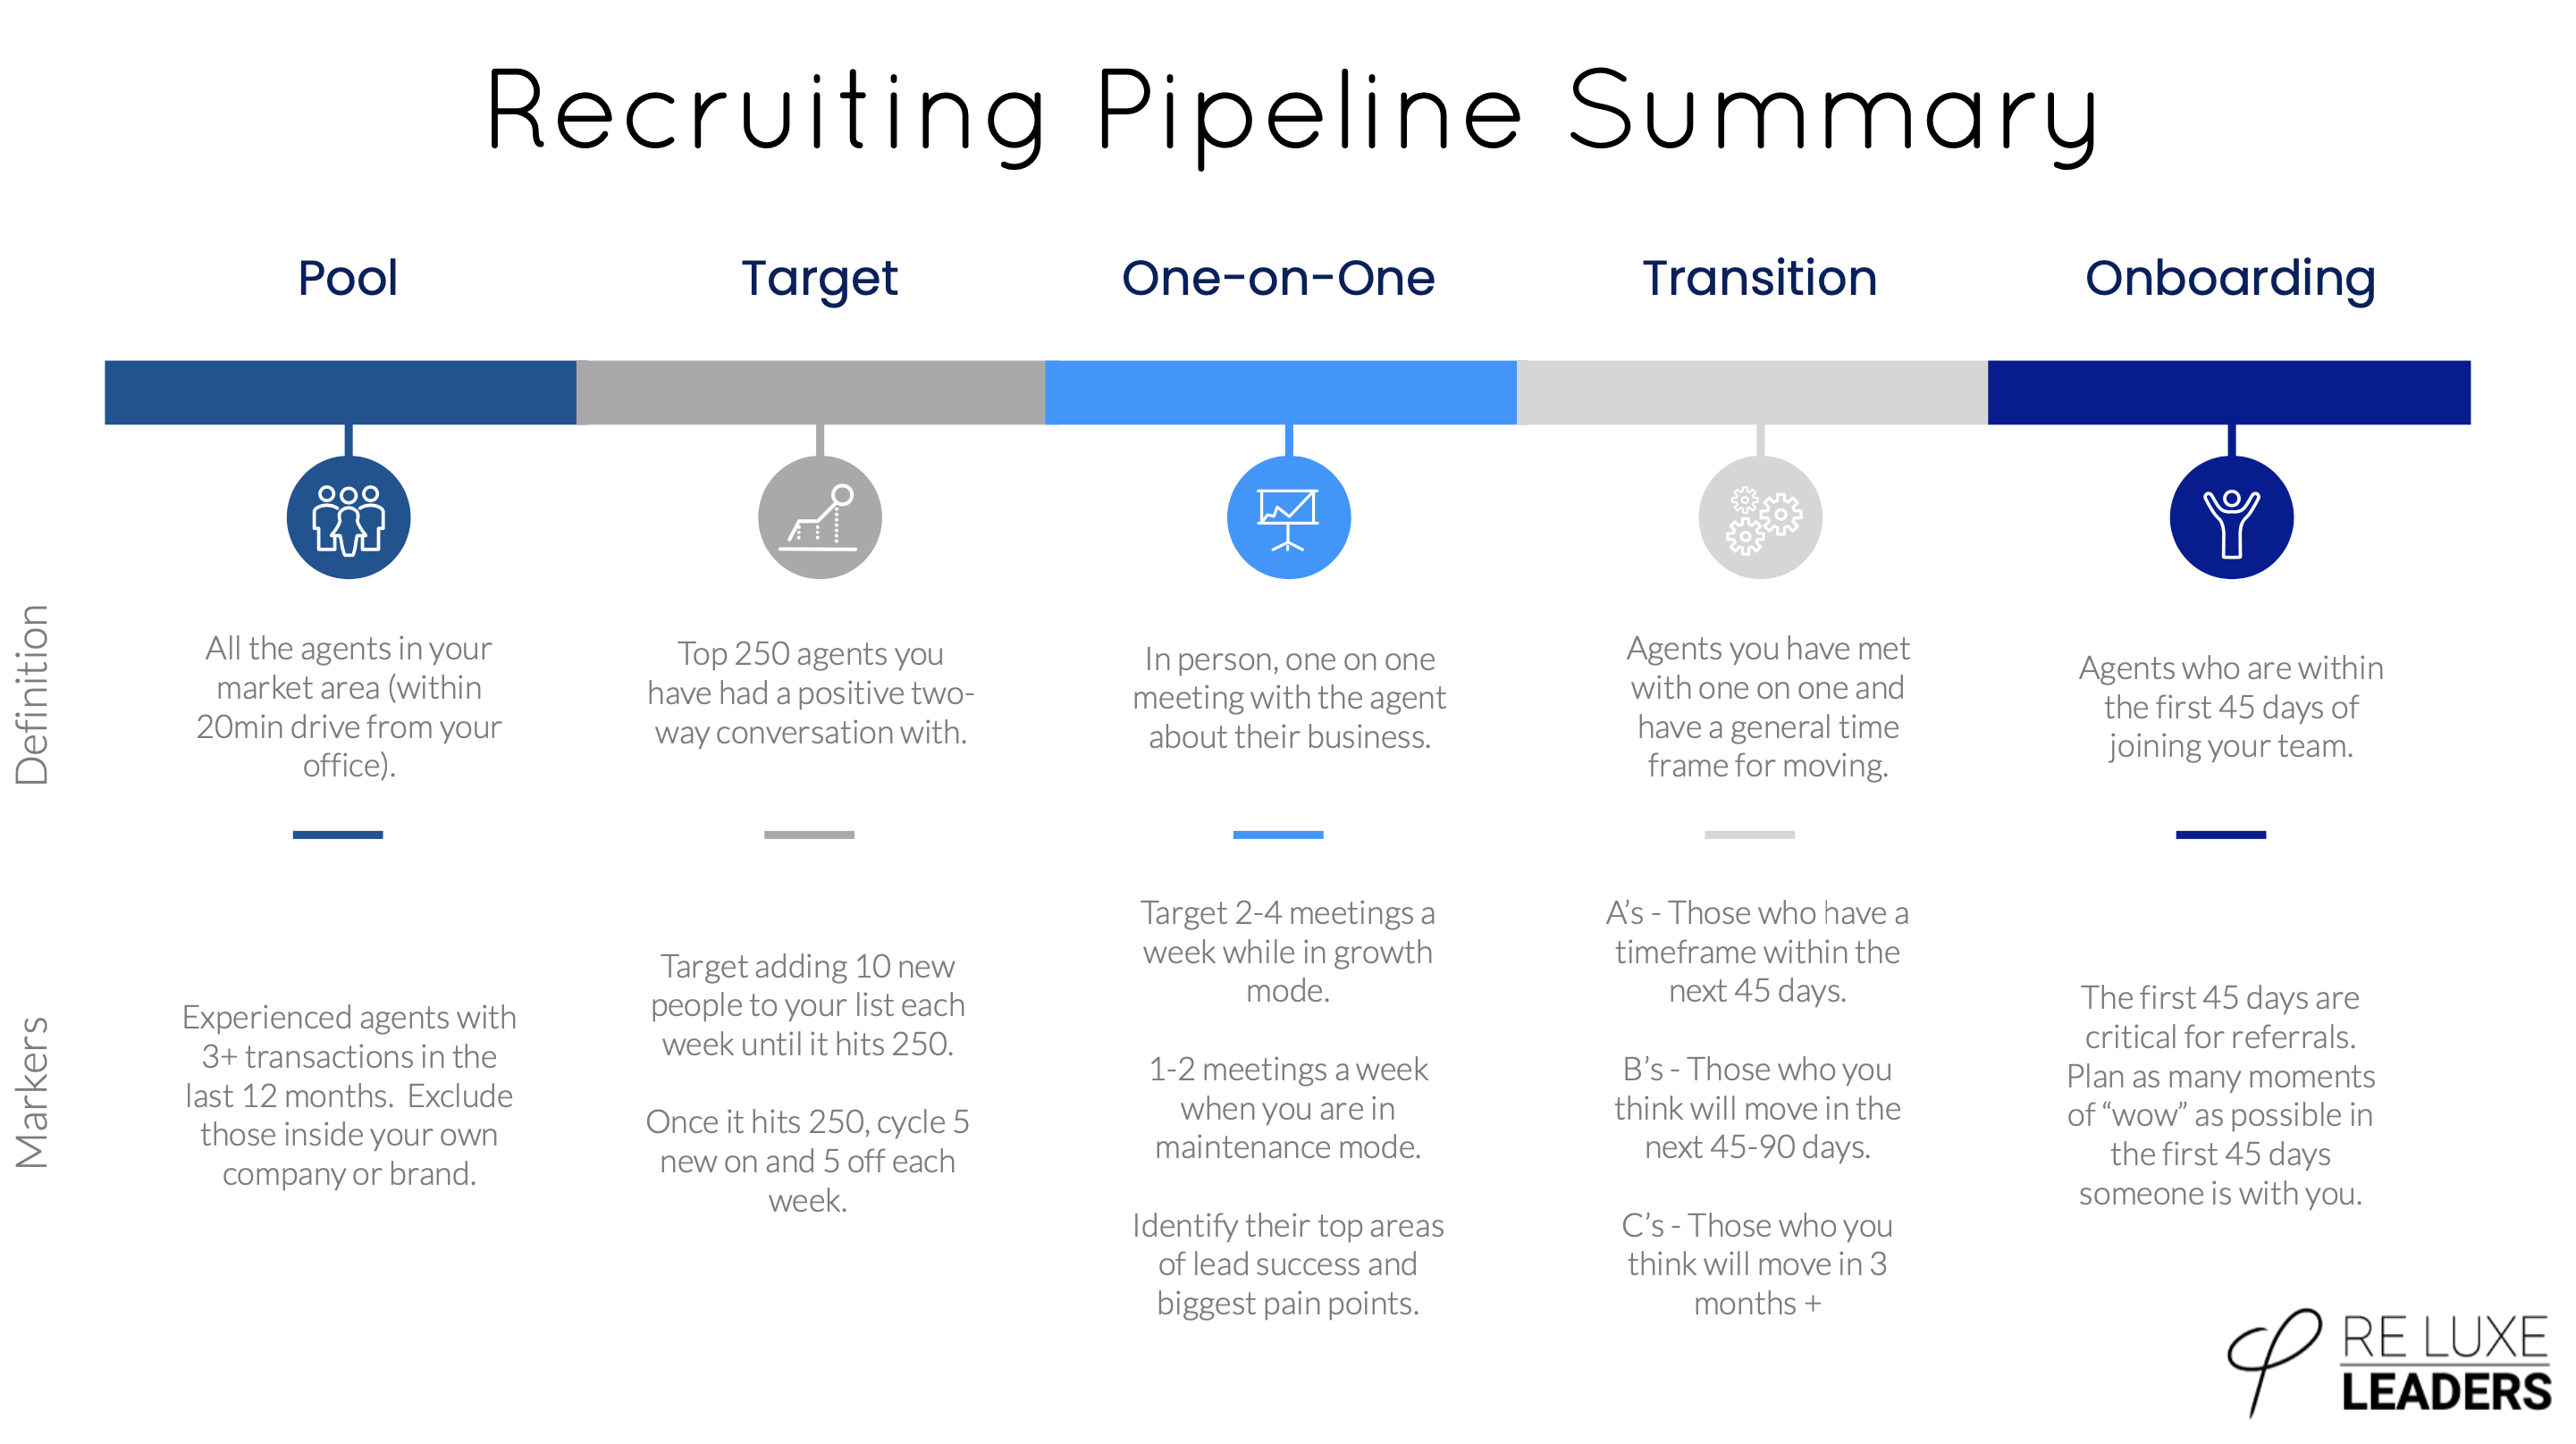 Breaking Down the Recruiting Pipeline